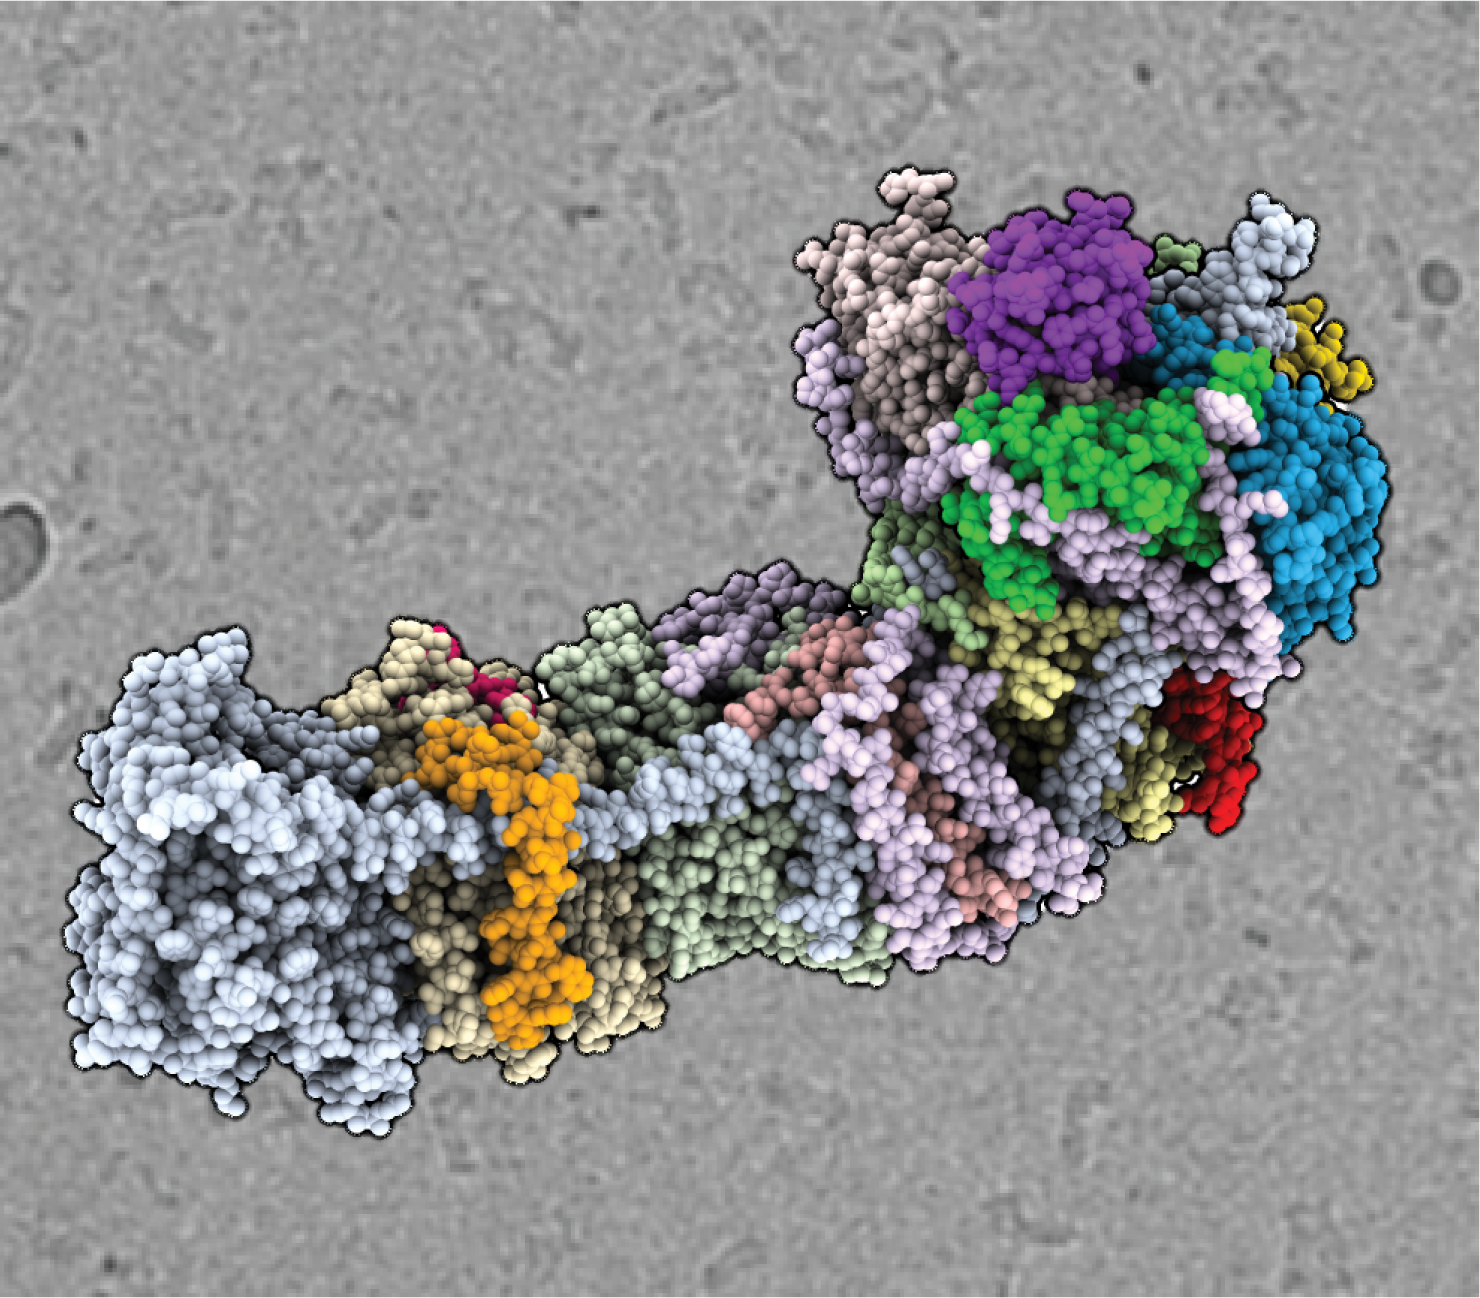 The cryo-EM structure of the NAD(P)H dehydrogenase-like complex (NDH). The atomic coordinate model shown as spheres, colored according to the different subunits, in front of an electron micrograph of frozen NDH particles in the background